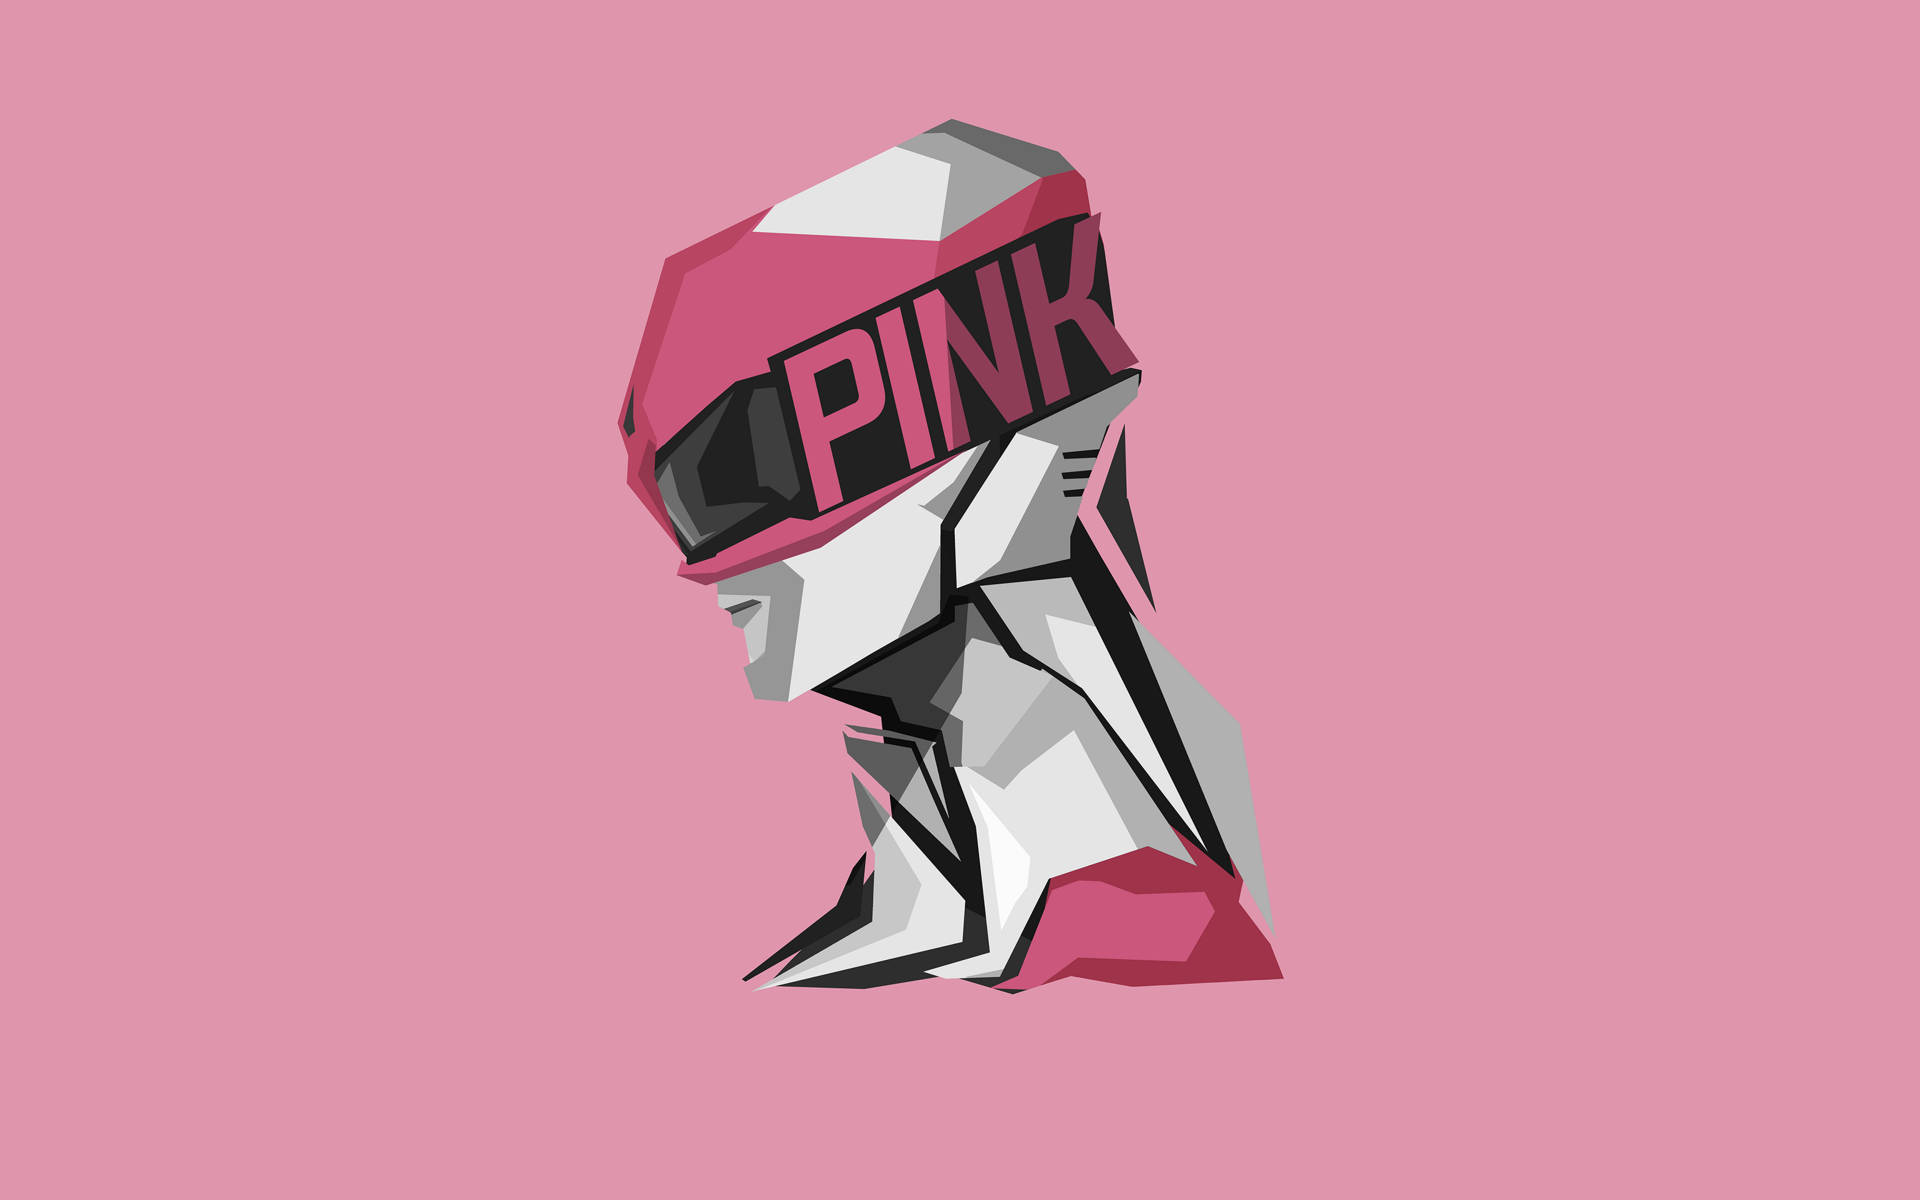 1920X1200 Power Rangers Wallpaper and Background